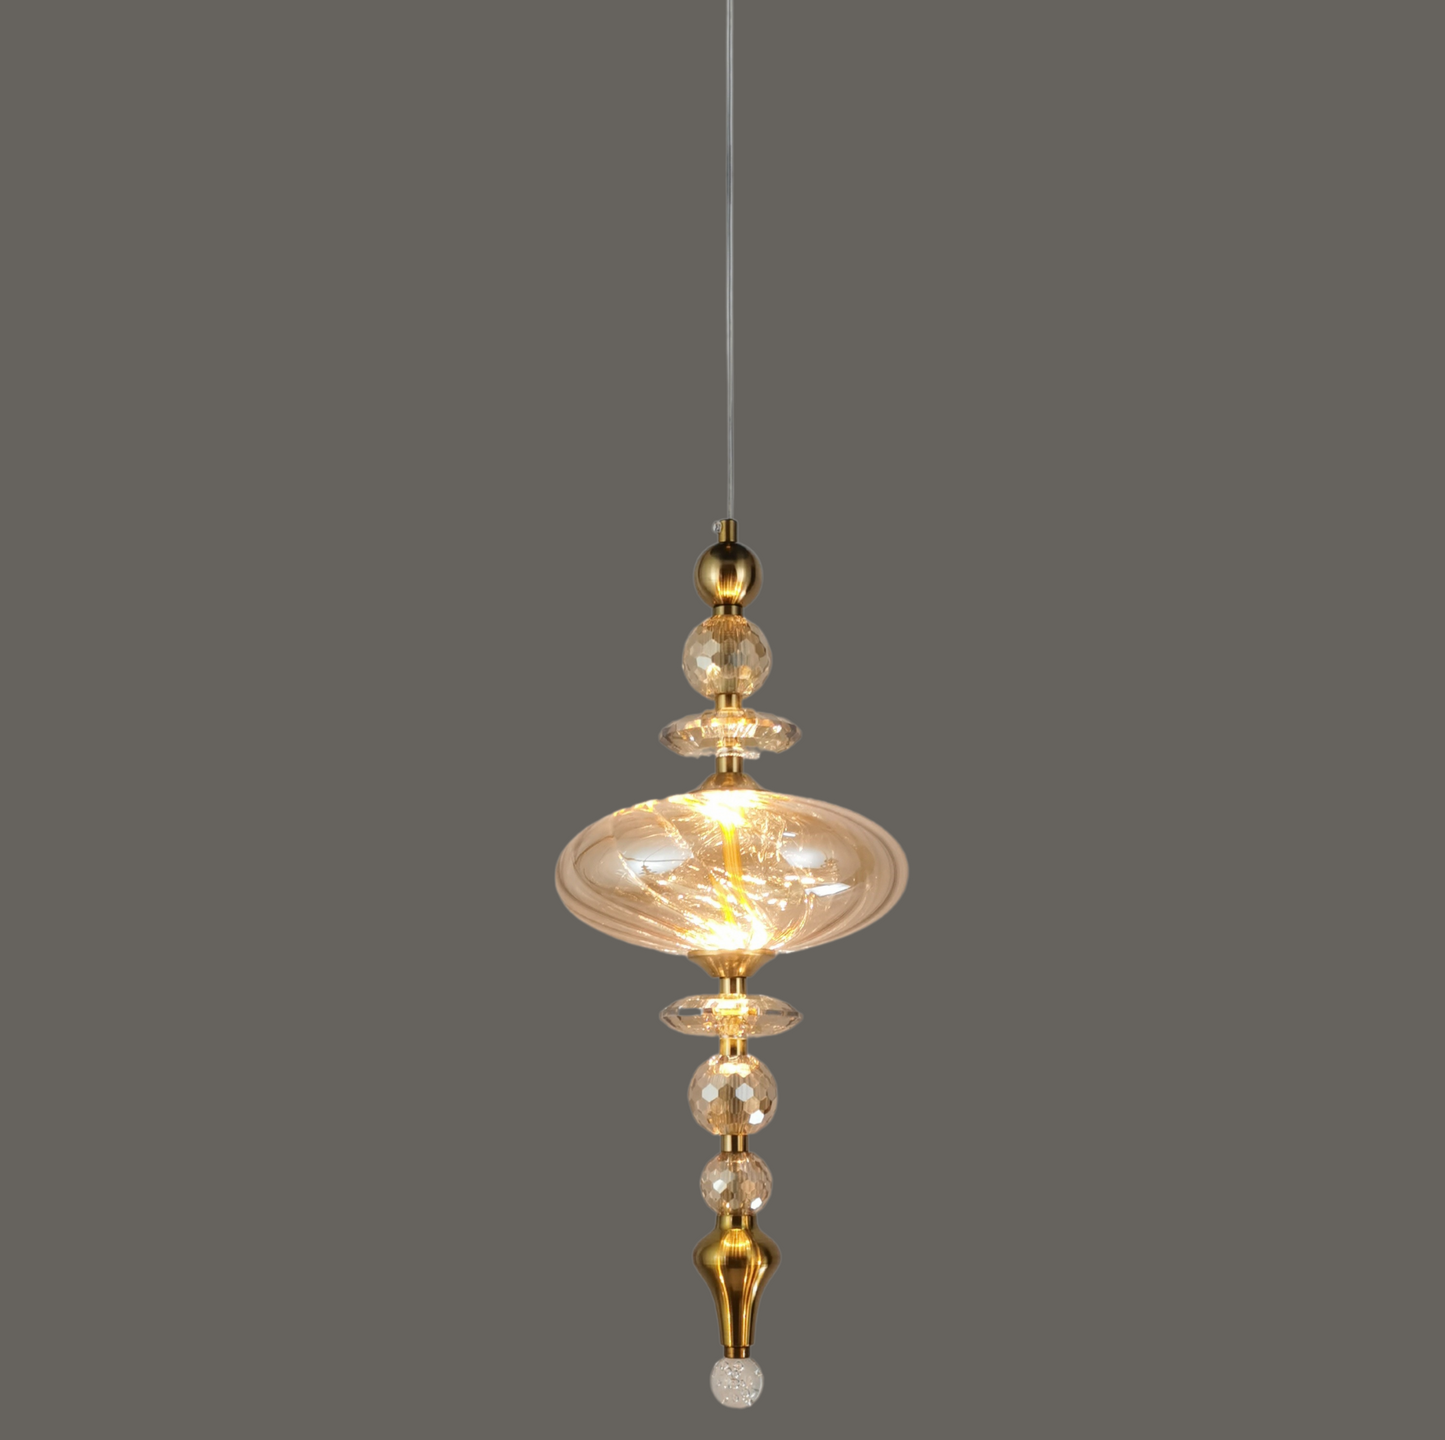 Premium Amber Crystal Metal Glass Led Hanging Indoor Pendent Light by Gloss (A1933/C/A3)